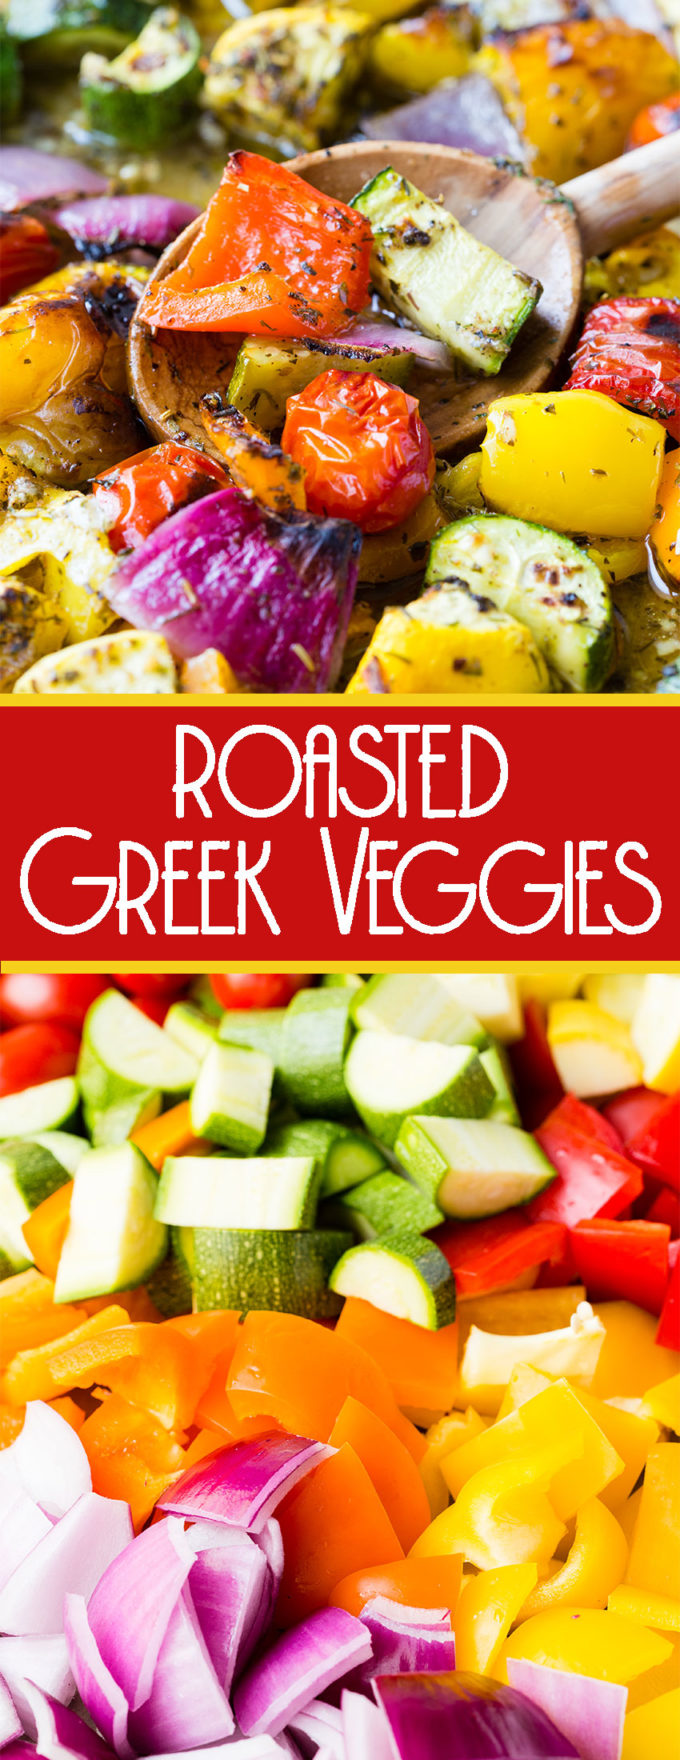 Sheet pan full of roasted greek veggies, so flavorful and delicious. The perfect side dish. 